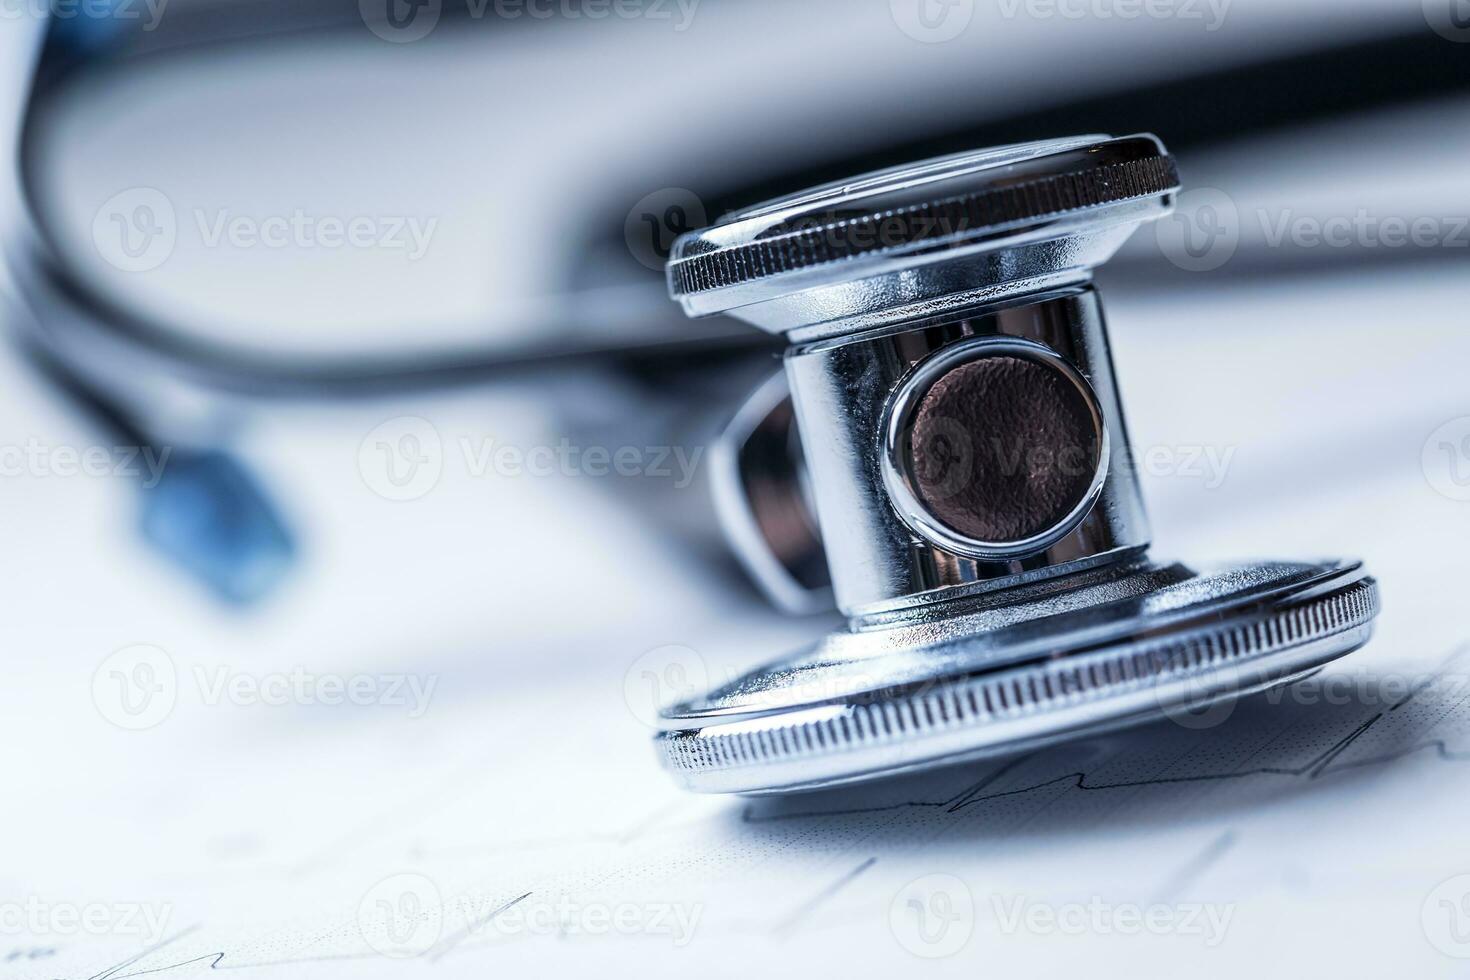 Stethoscope on a heart monitor printout.Electrocardiogram chart and stethoscope. photo